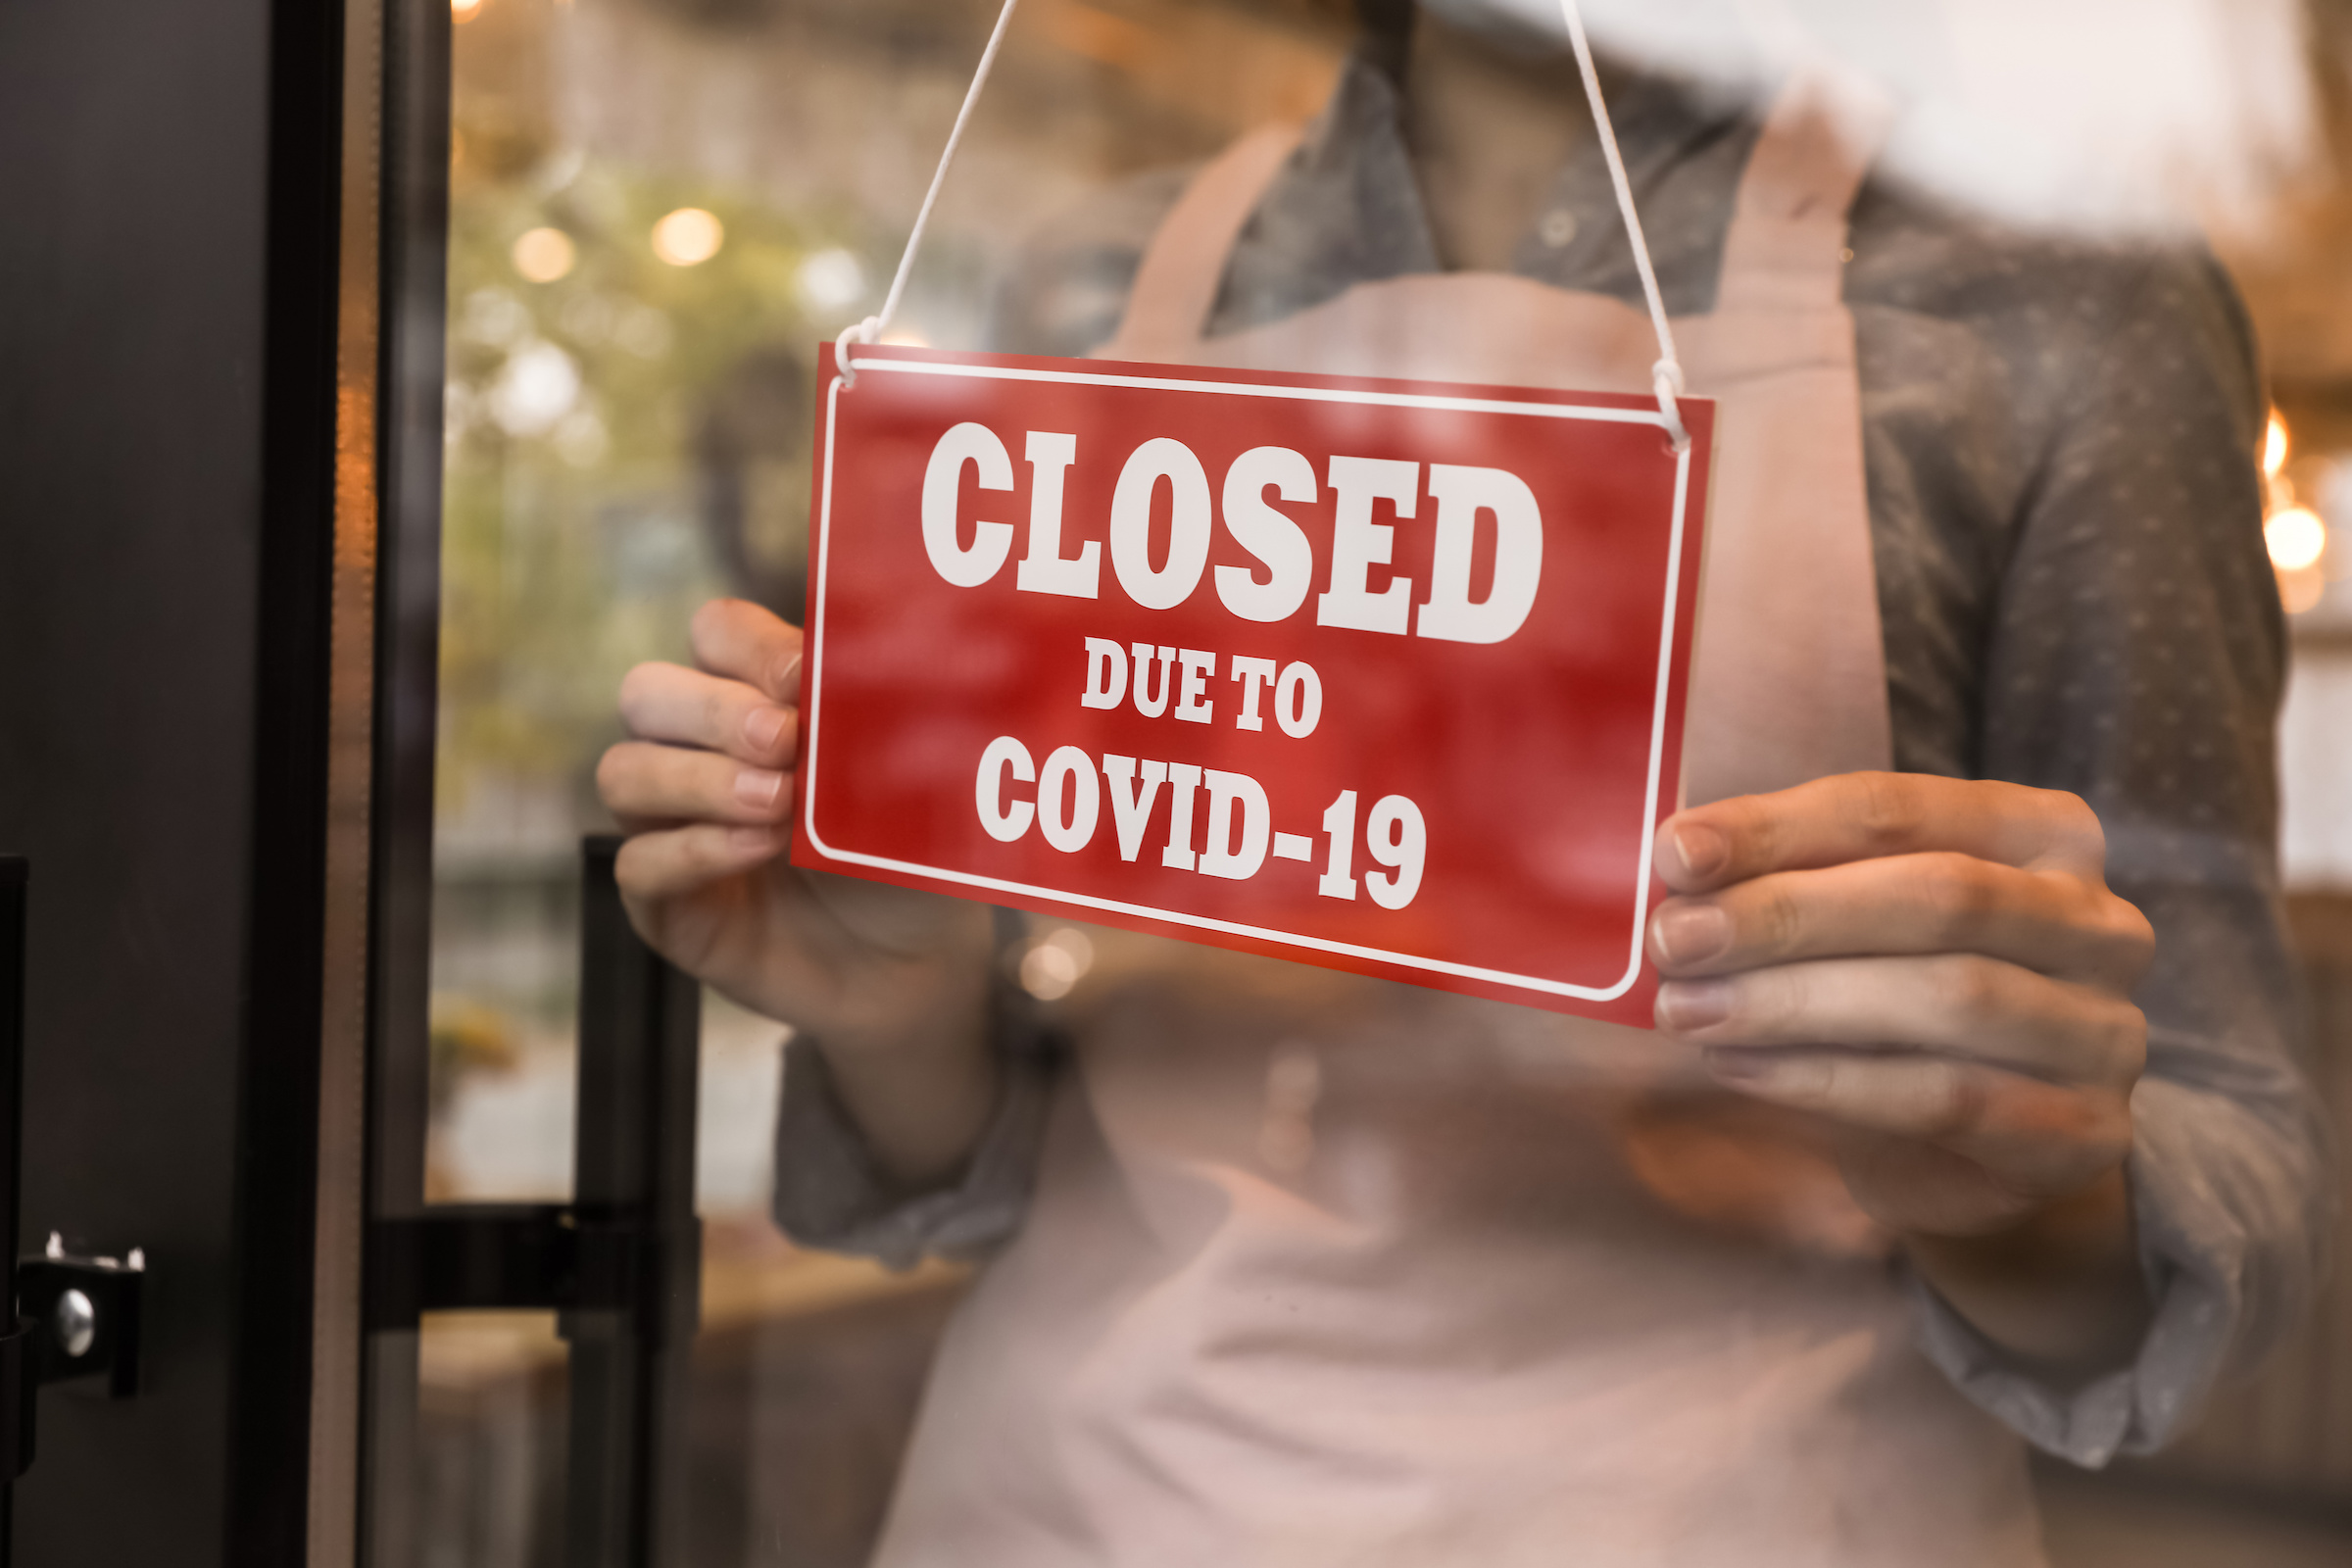 "Closed Due To Covid-19" red sign on a glass door